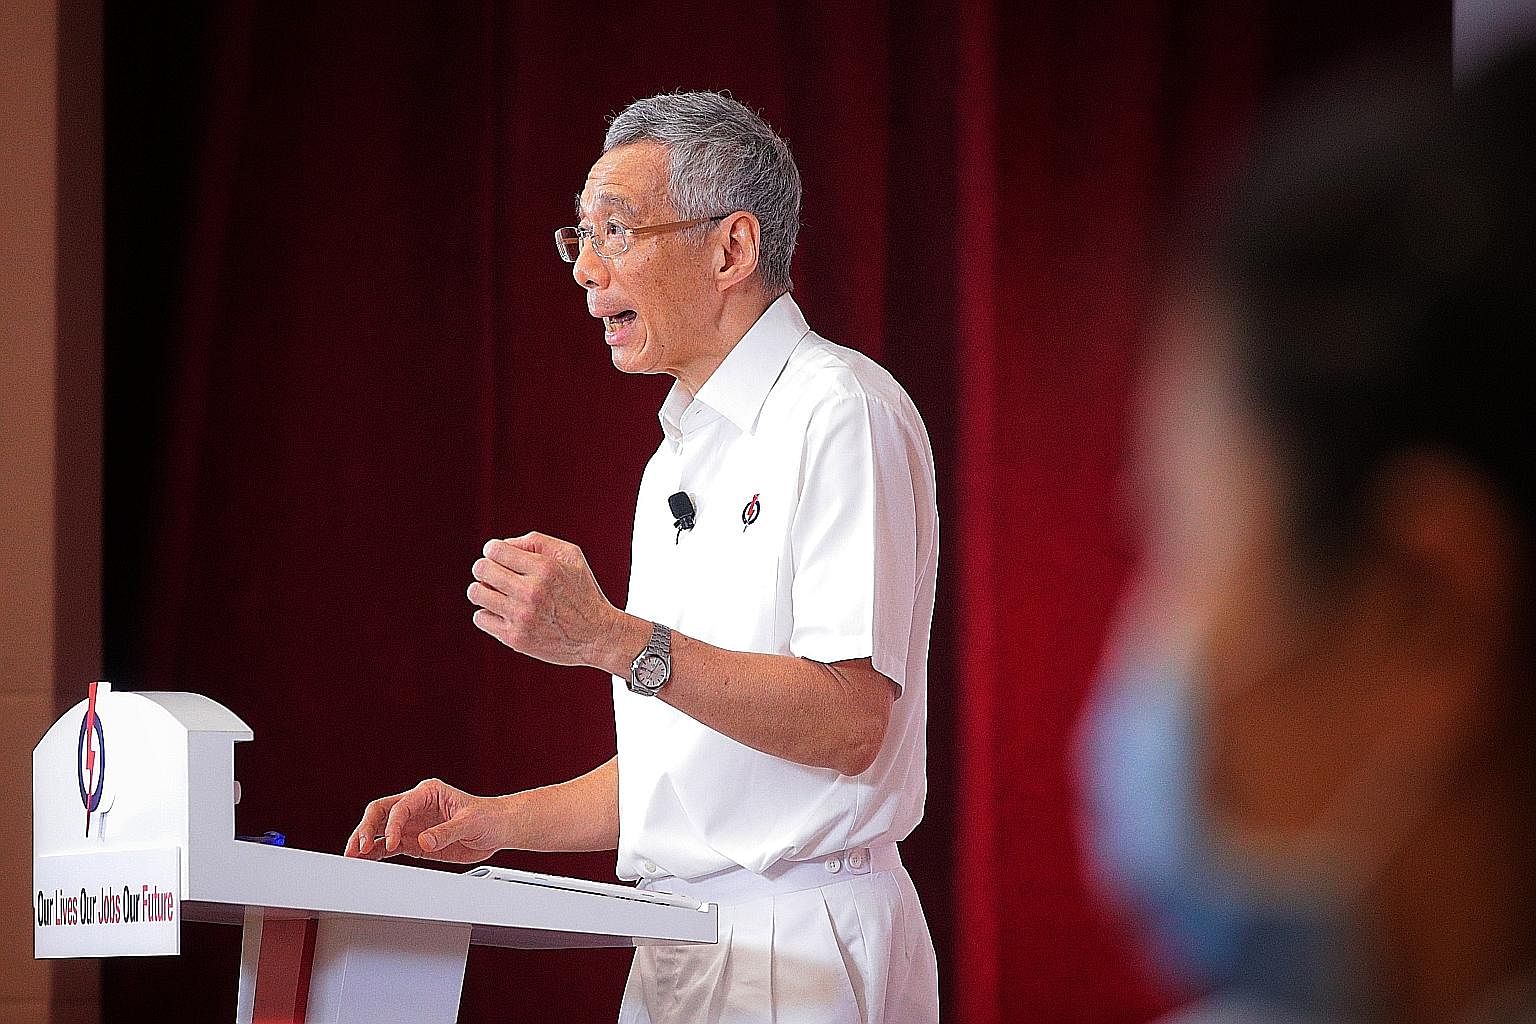 Prime Minister Lee Hsien Loong at the Fullerton election rally, which was streamed live on Facebook and YouTube yesterday. ST PHOTO: JASON QUAH